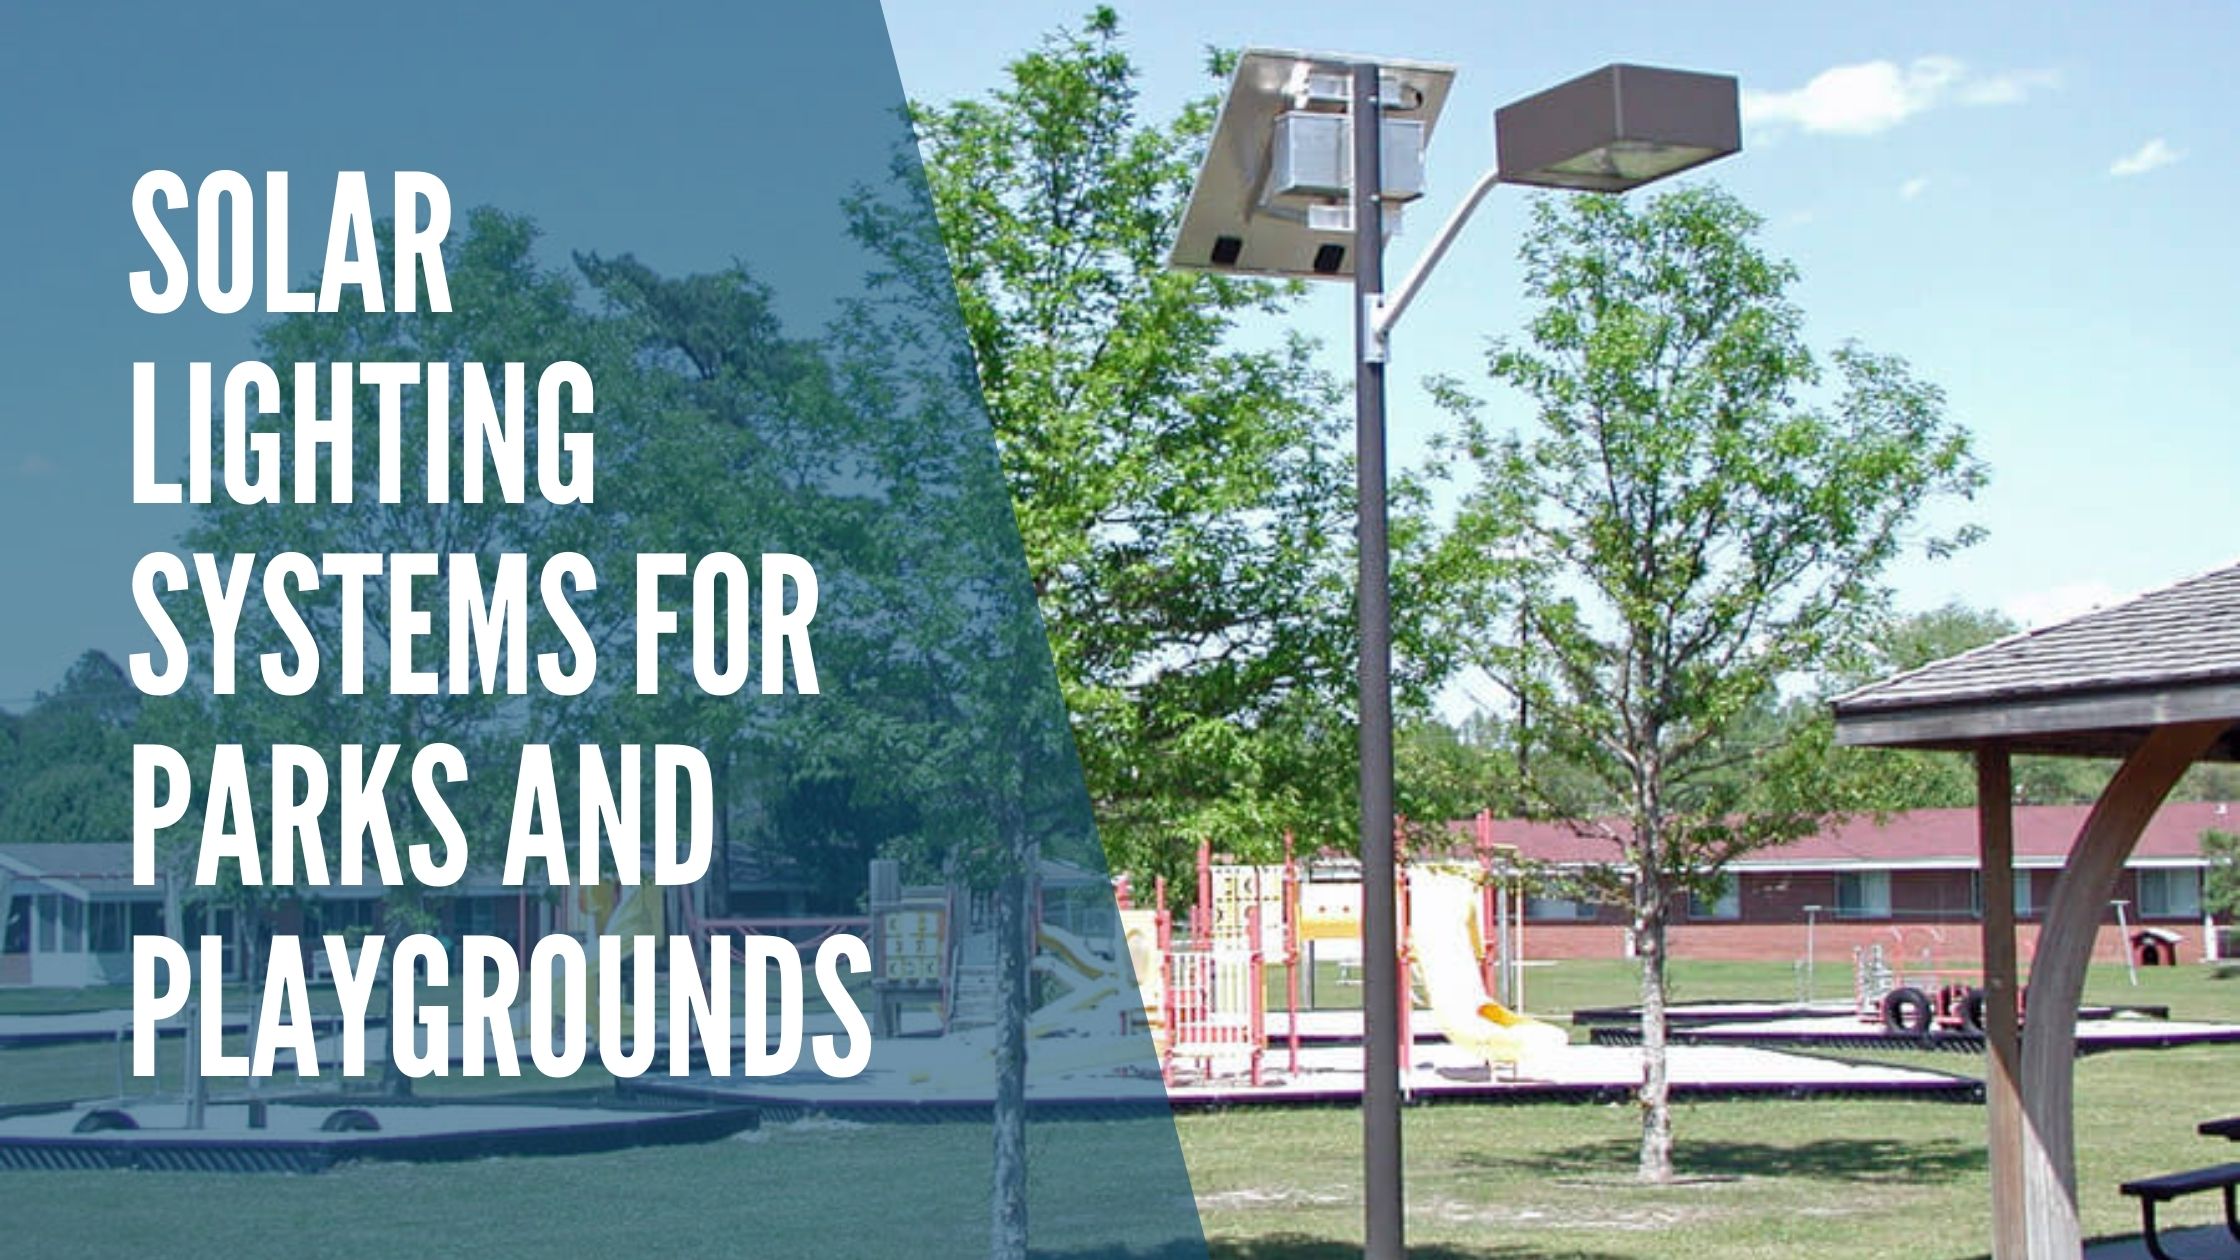 Solar Lighting Systems for Parks and Playgrounds